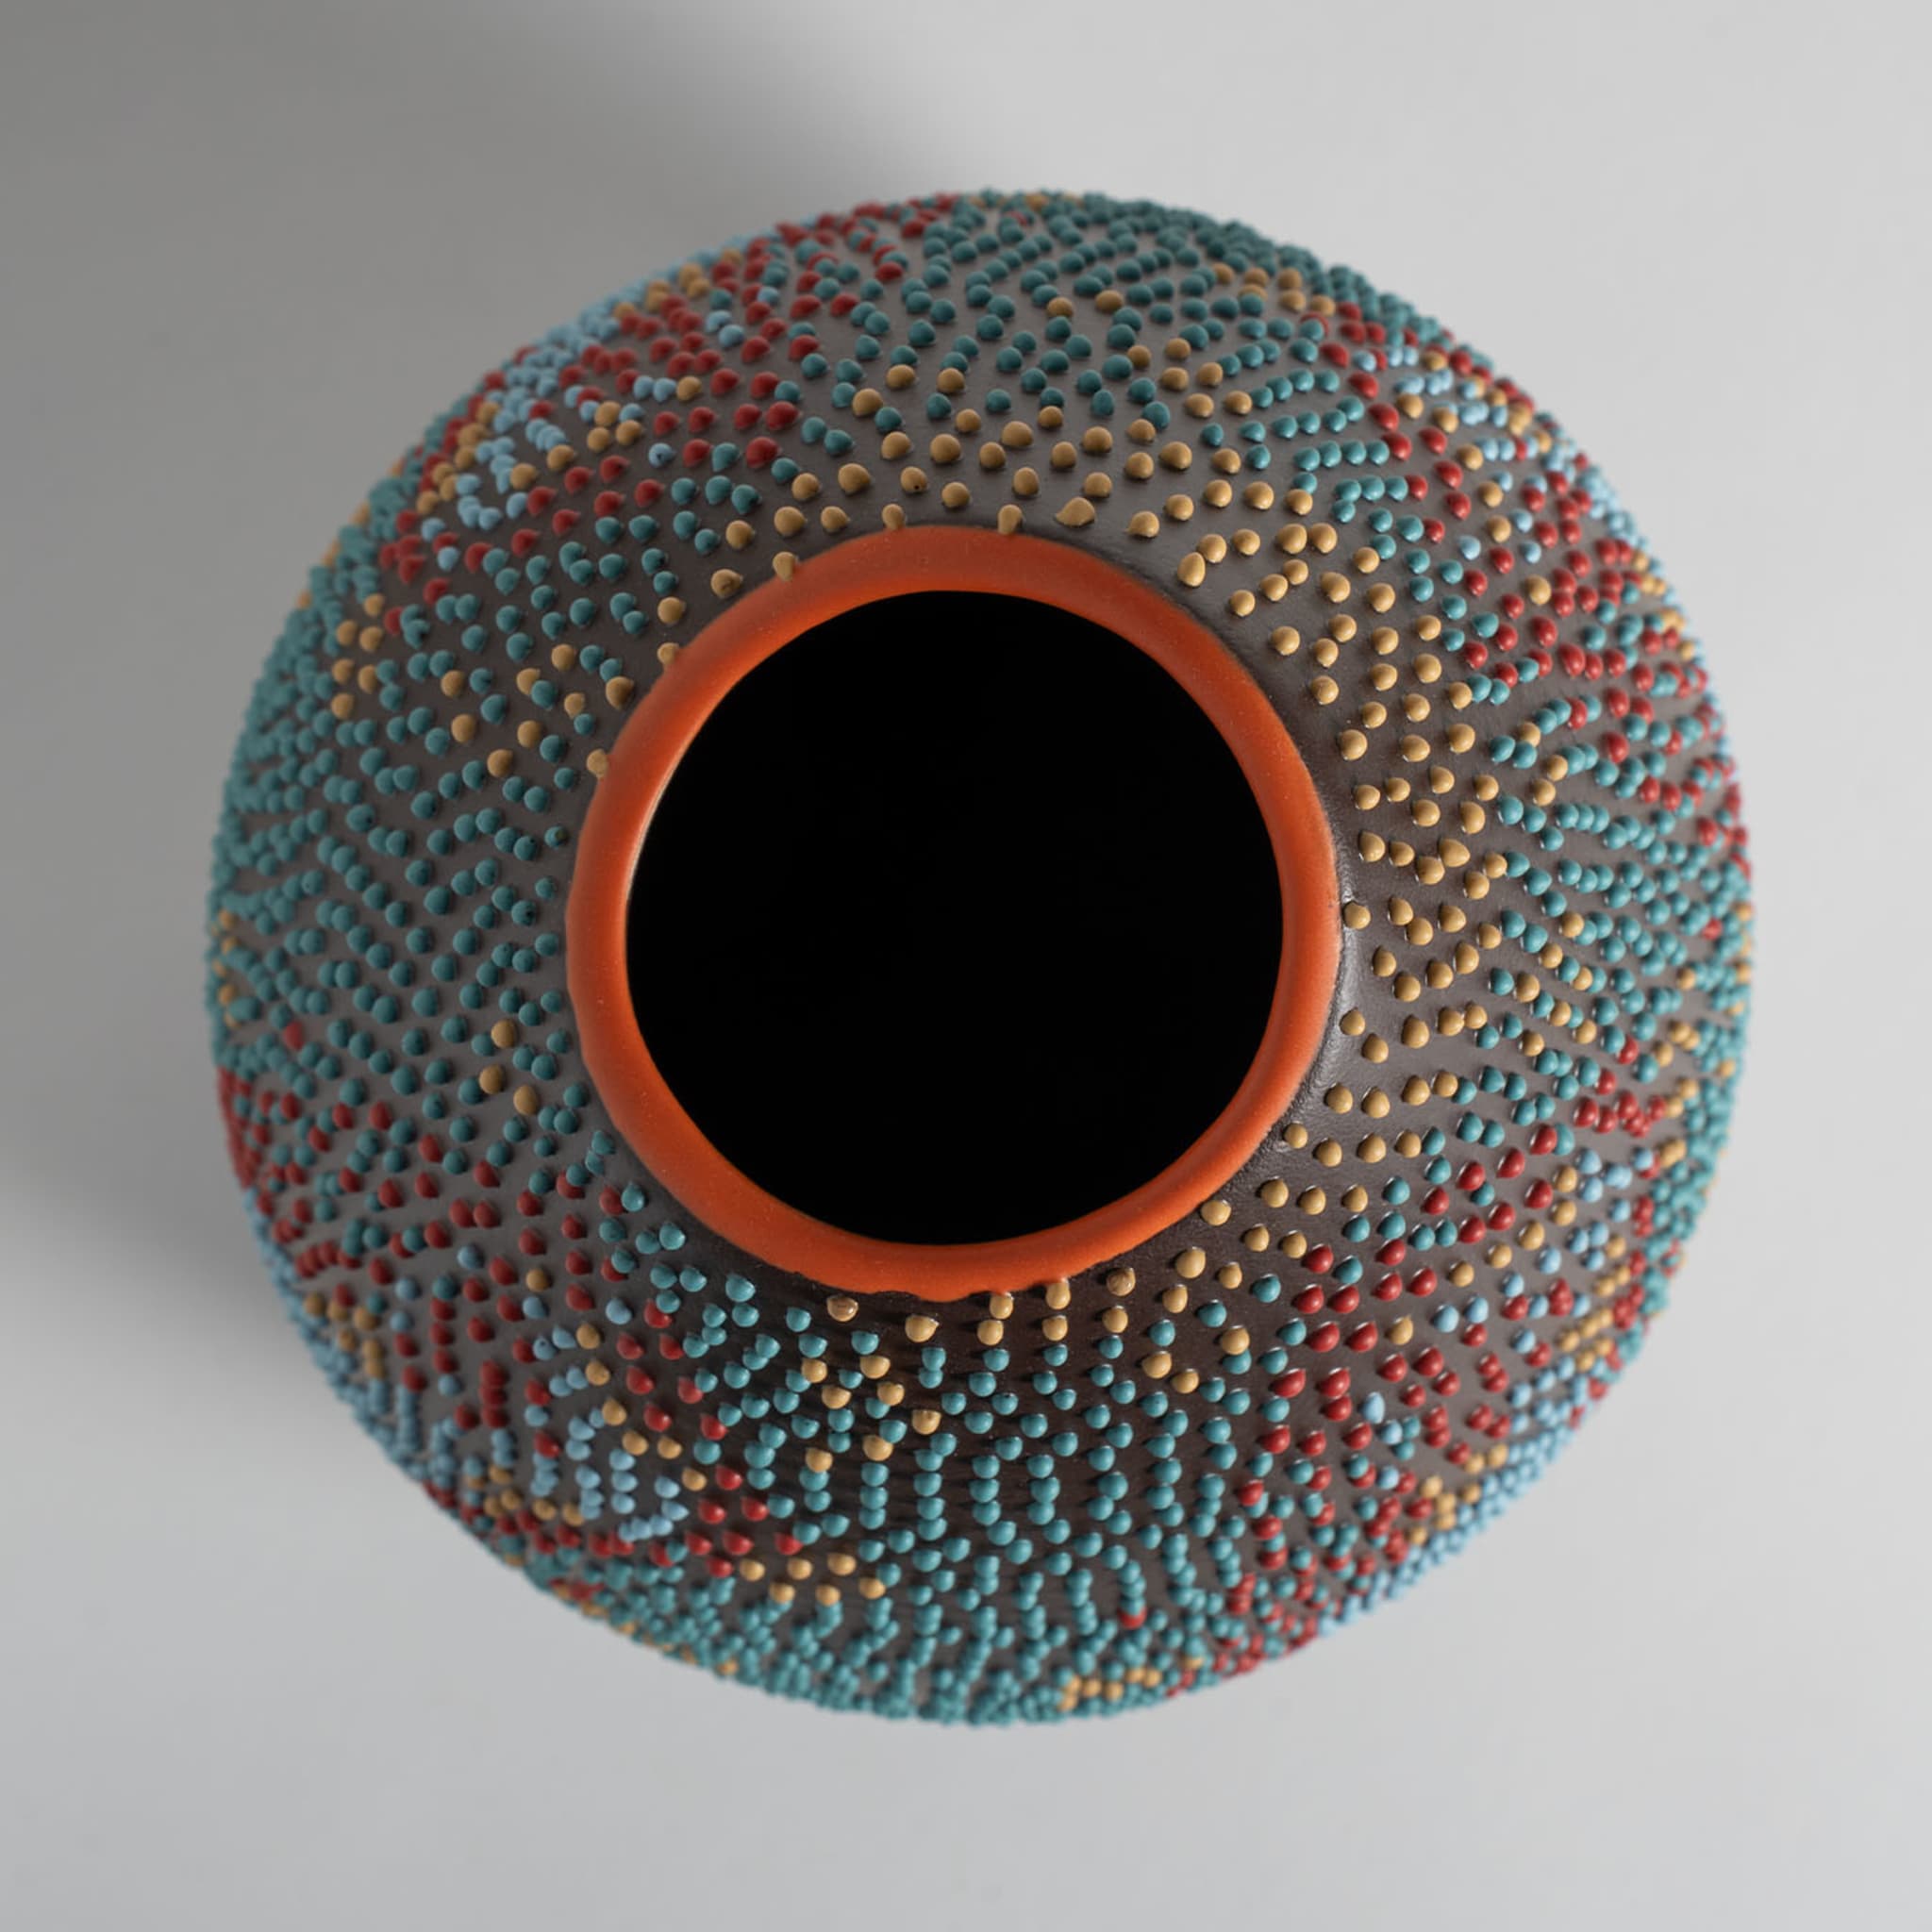 RIC-4 Chameleon Polychrome Vase by A. Mancuso/Analogia Projects - Alternative view 4